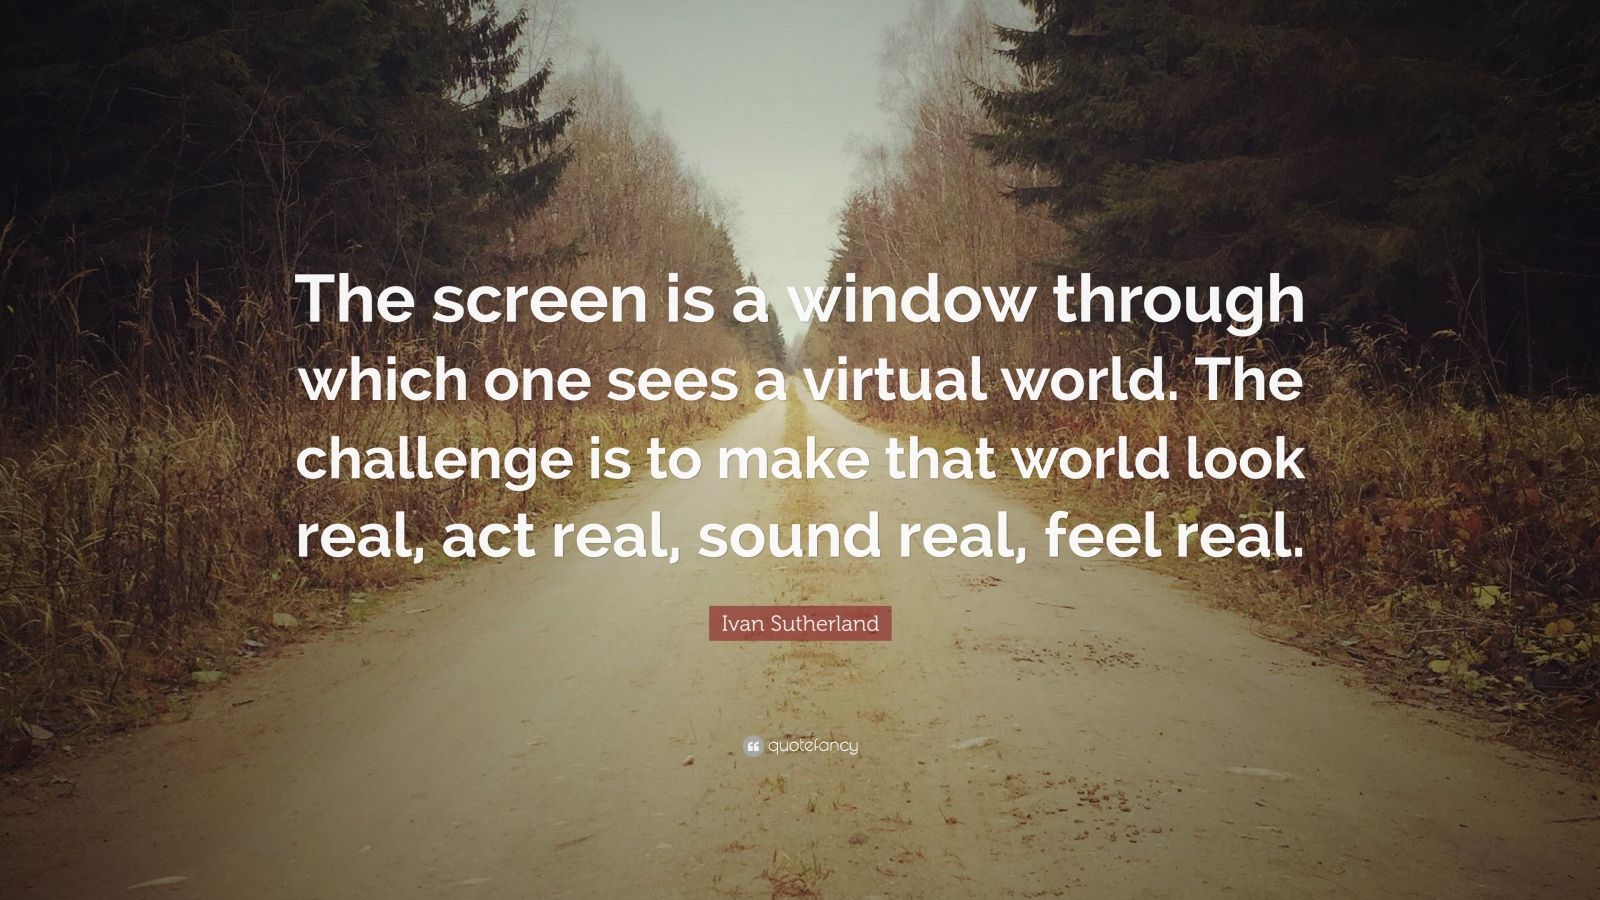 Ivan Sutherland Quote “The screen is a window through